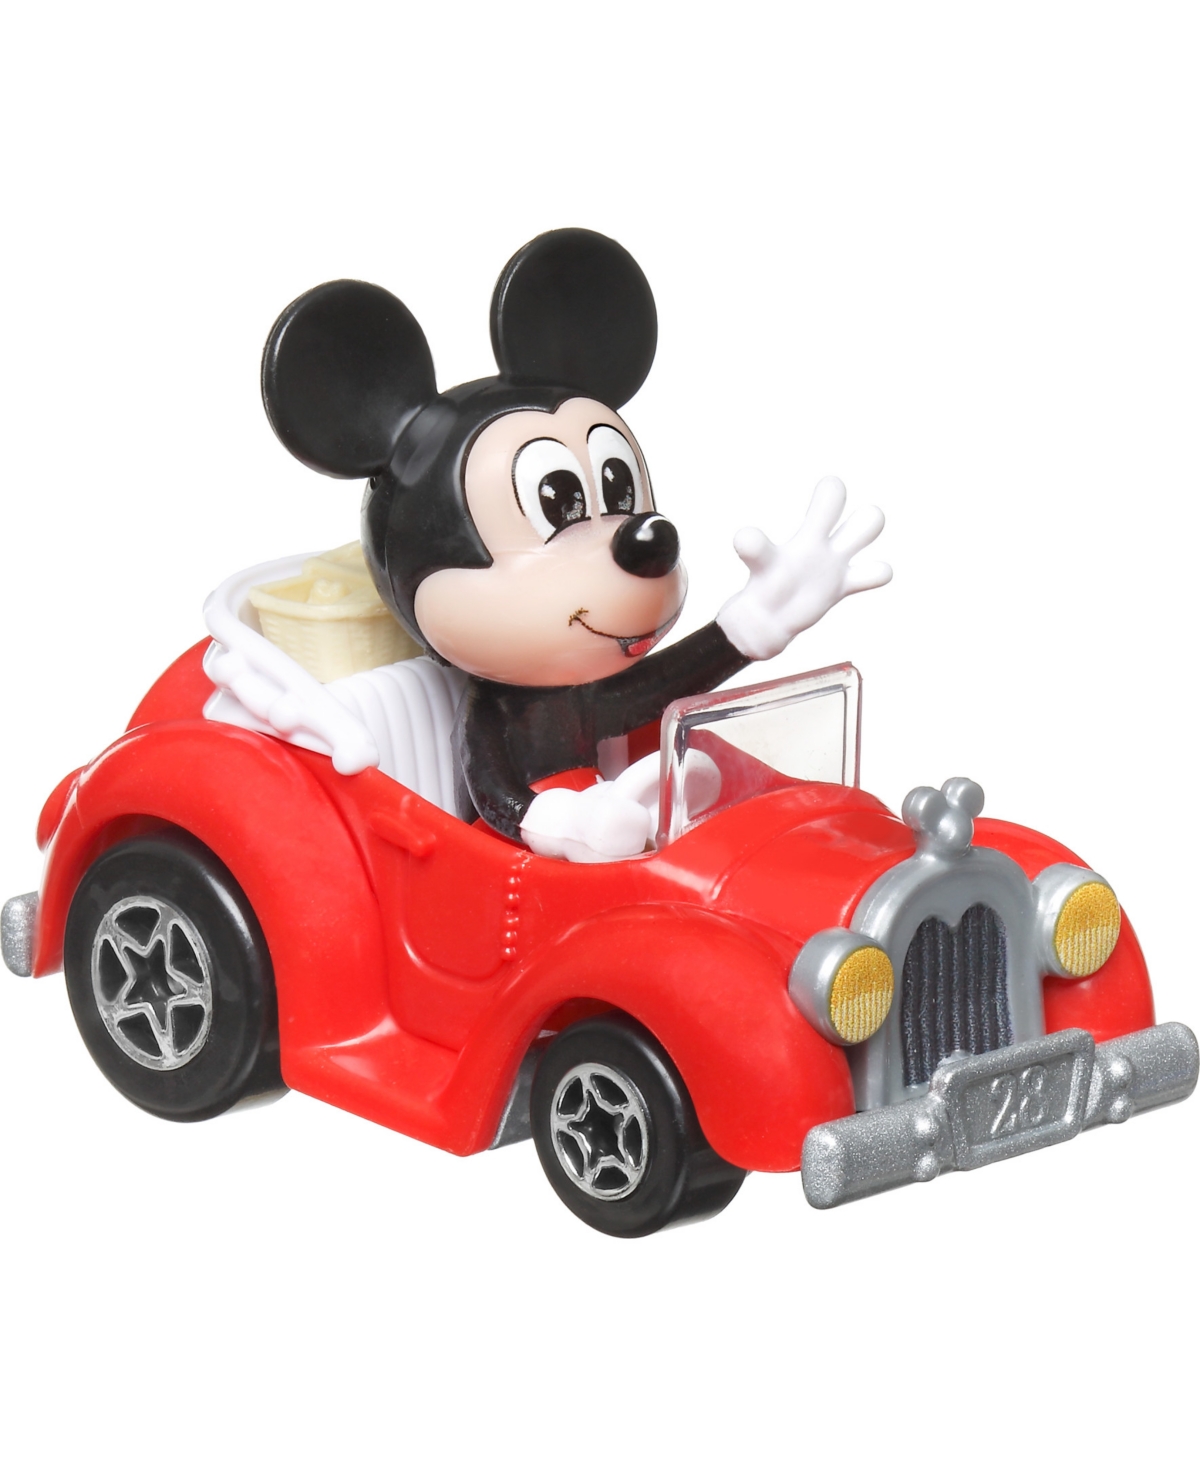 Shop Hot Wheels Racerverse Set Of 4 Die-cast  Cars With Disney Characters As Drivers In Multi-color